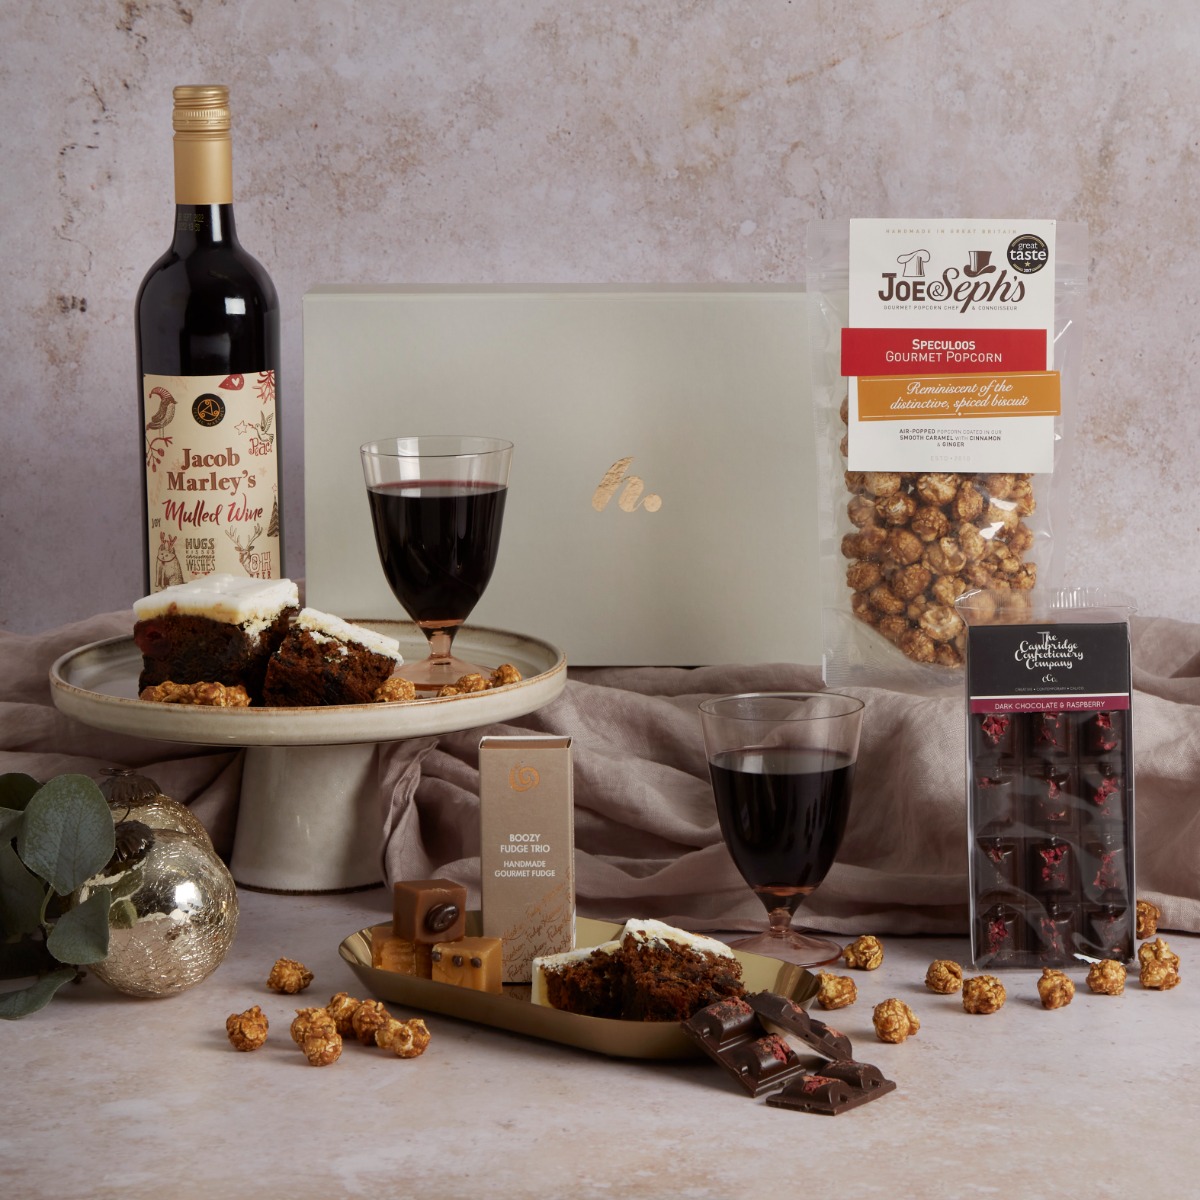 Luxury festive flavours with contents on display - all gluten free